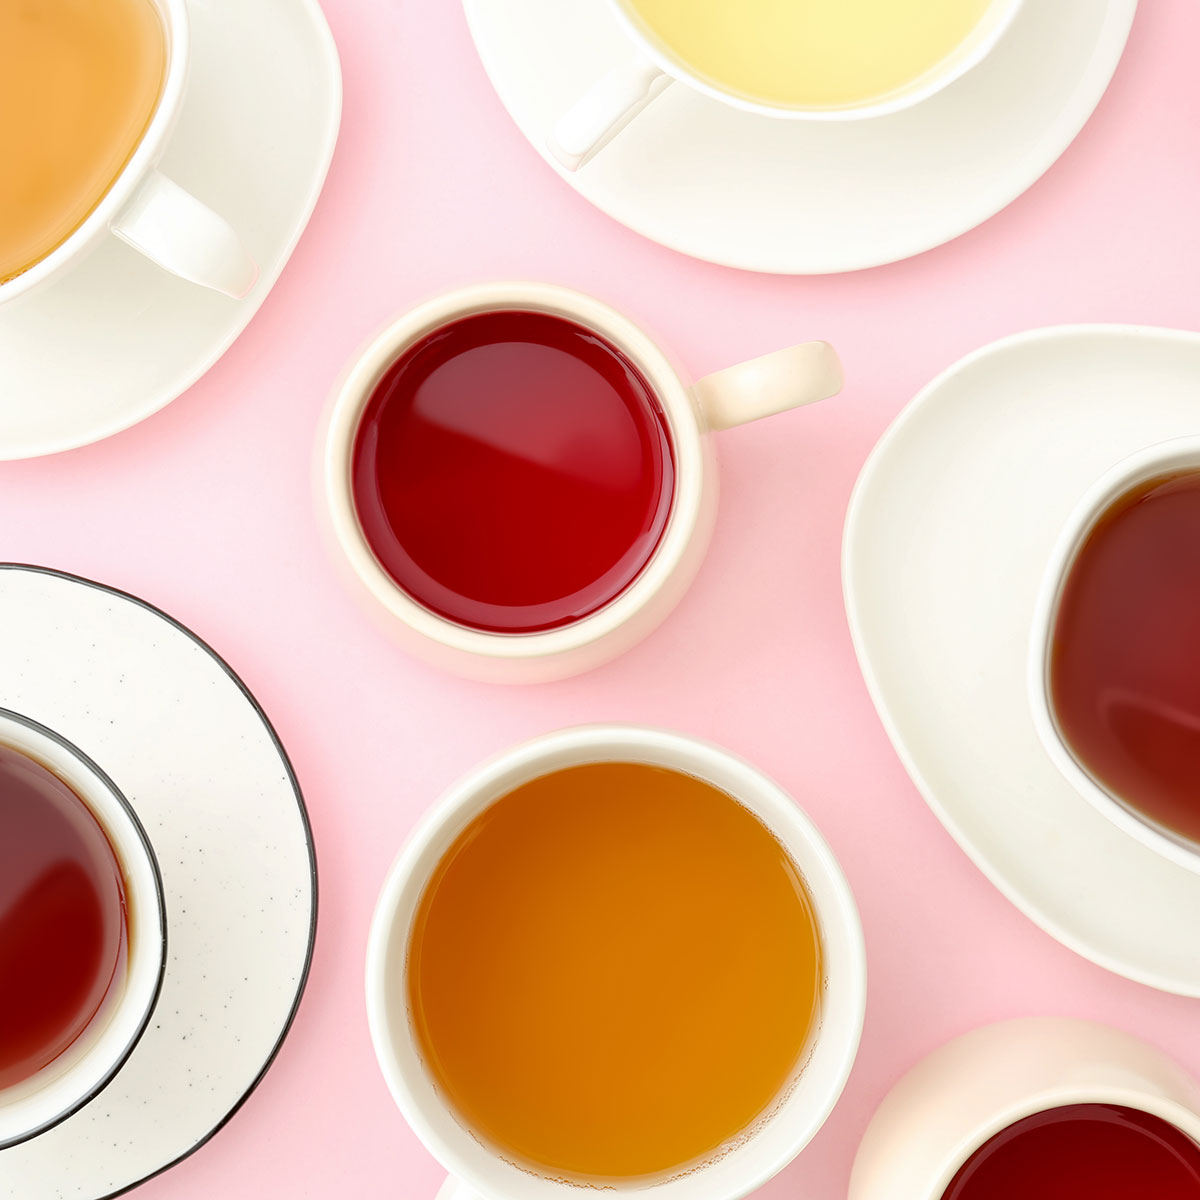 Many types of tea on pink background.